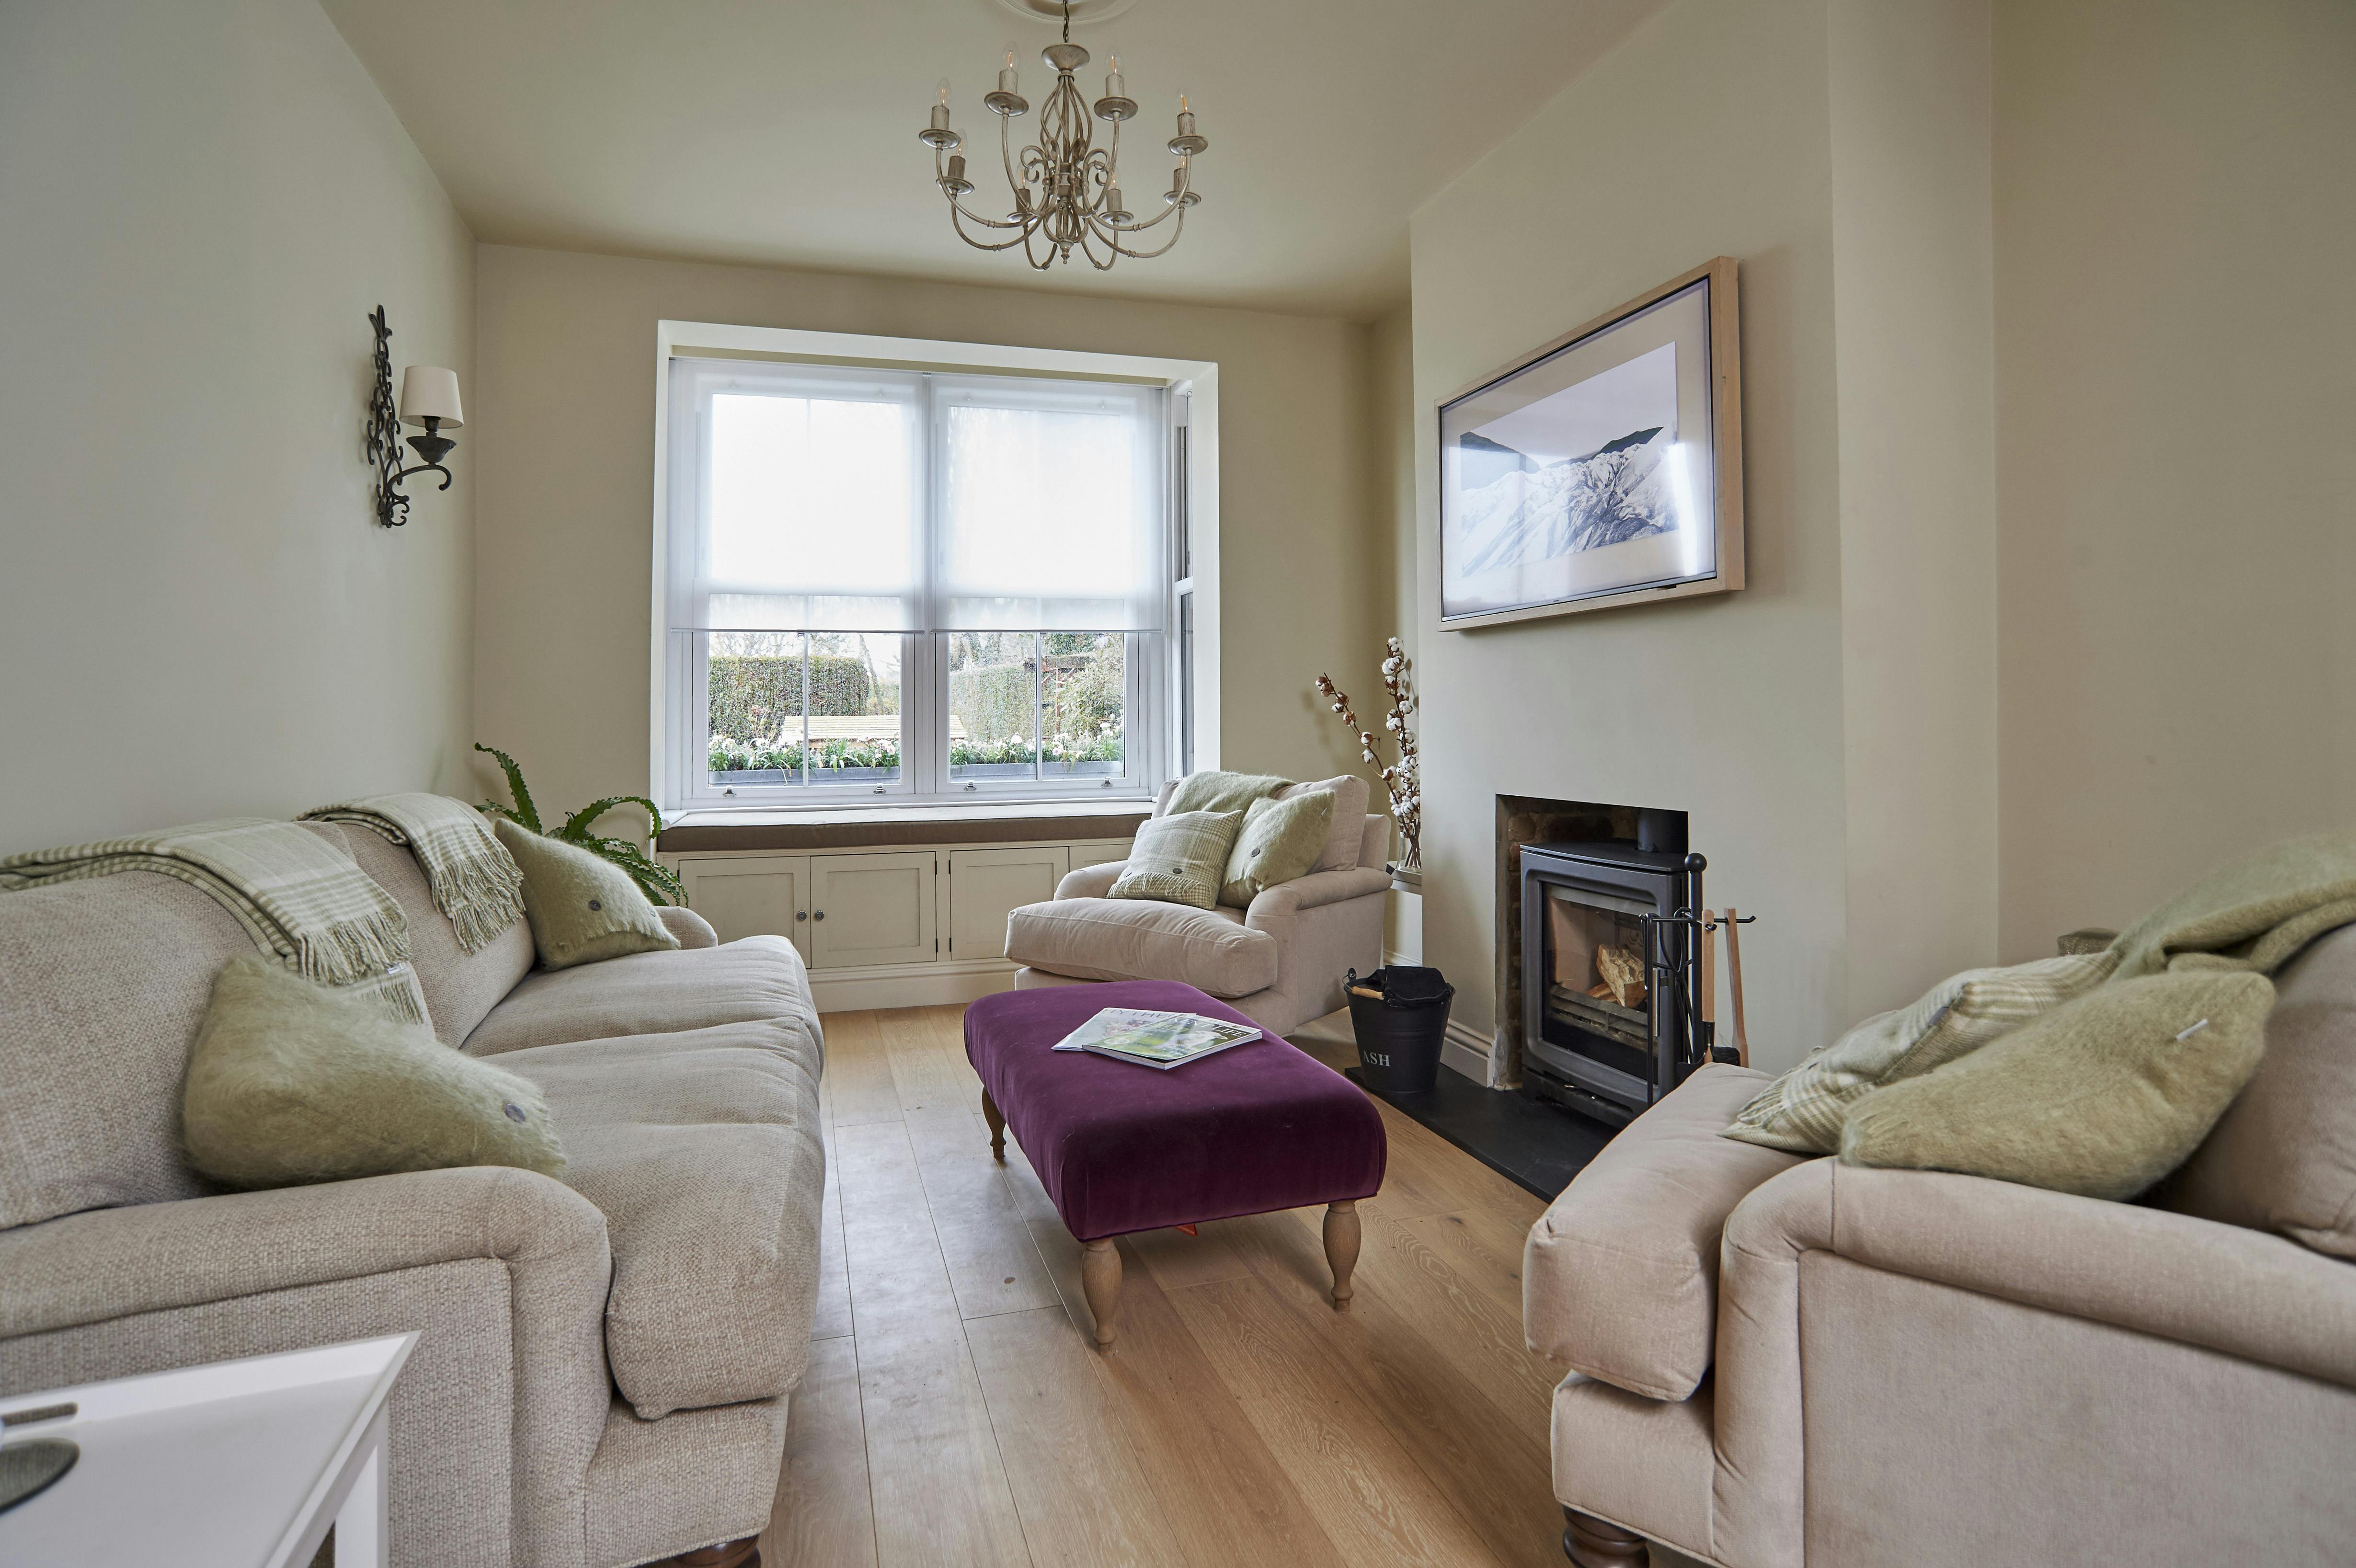 The Living Area. Aquaclean Sofas & Armchairs, cushions and blankets, velvet foot stall, bay window seat, log burner & TV